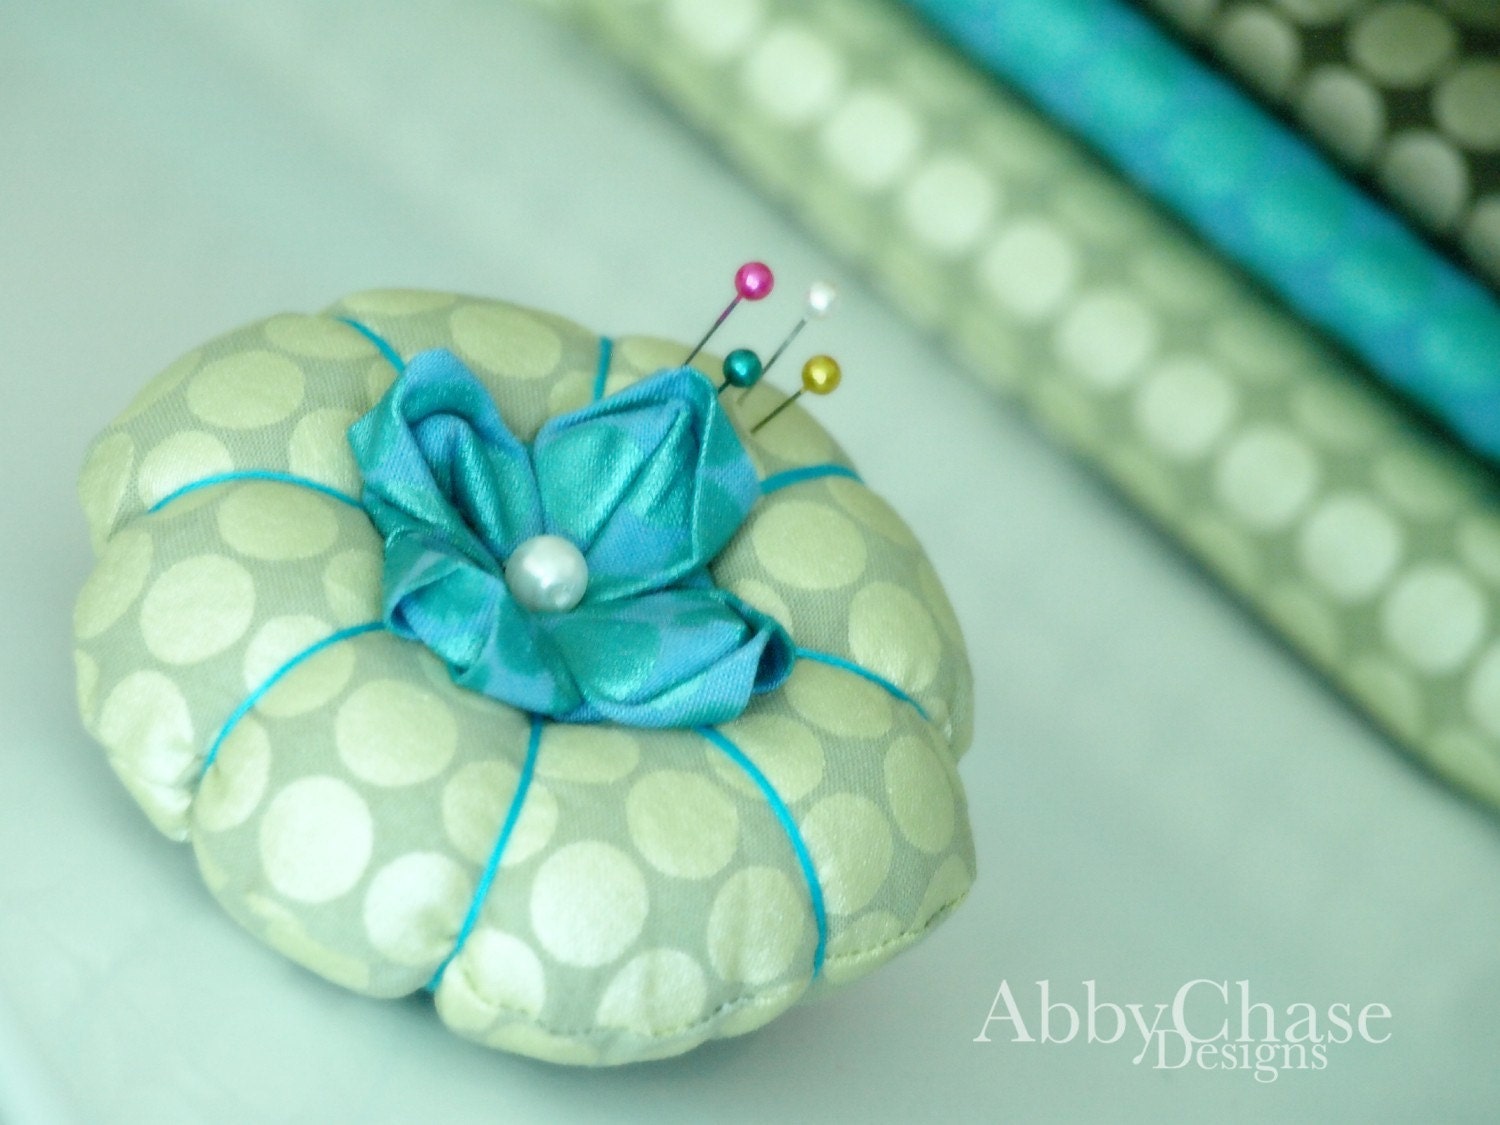 Lotus Blossom Pin Pillow............ by AbbyChase Designs......... The newest in the pincushion line